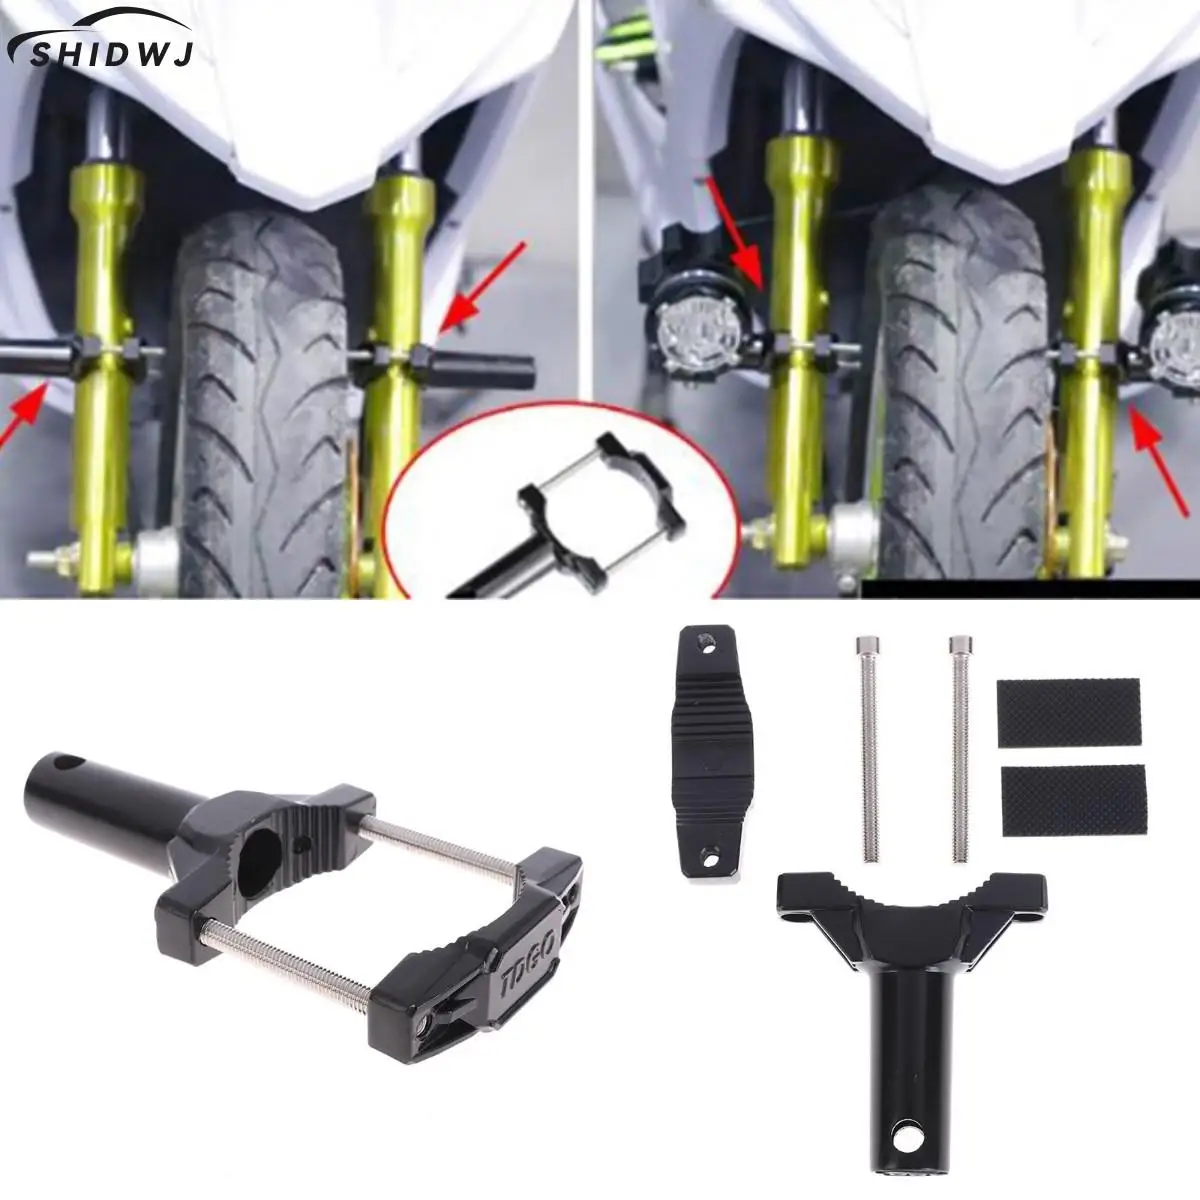 Universal Mount Bracket For Motorcycle Bumper Modified Headlight Stand Spotlight Extension Pole Frame Support Extension Bracket